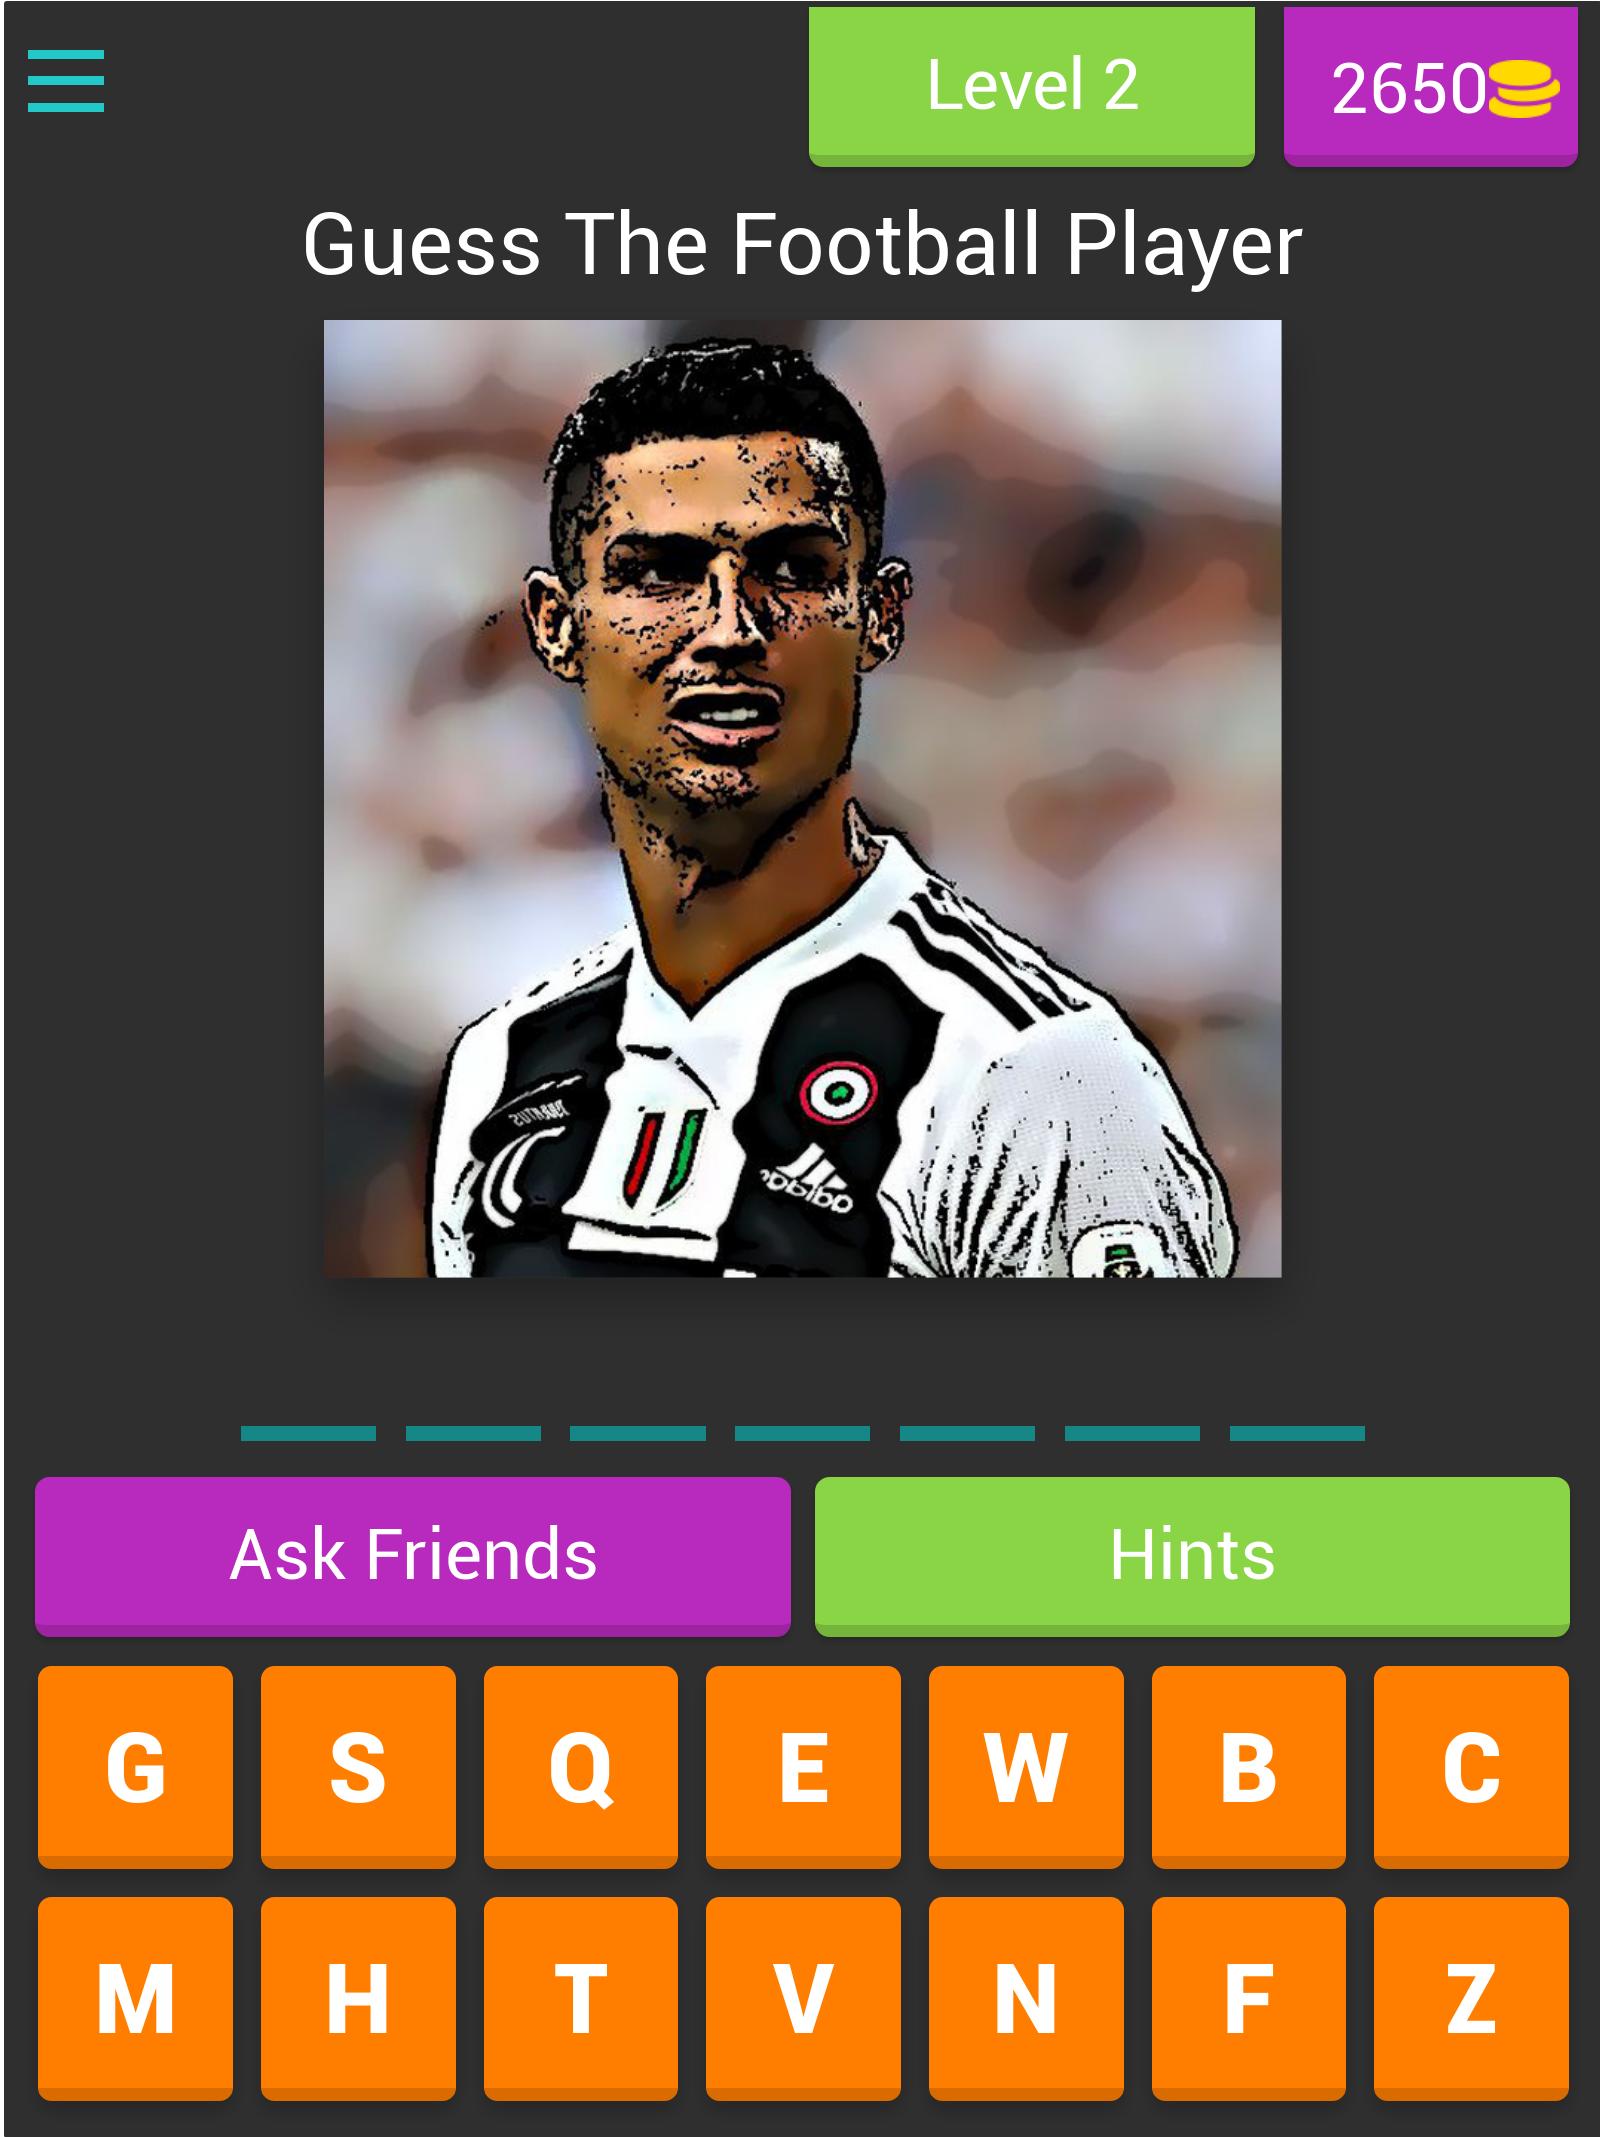 Guess The Football Player for Android - APK Download